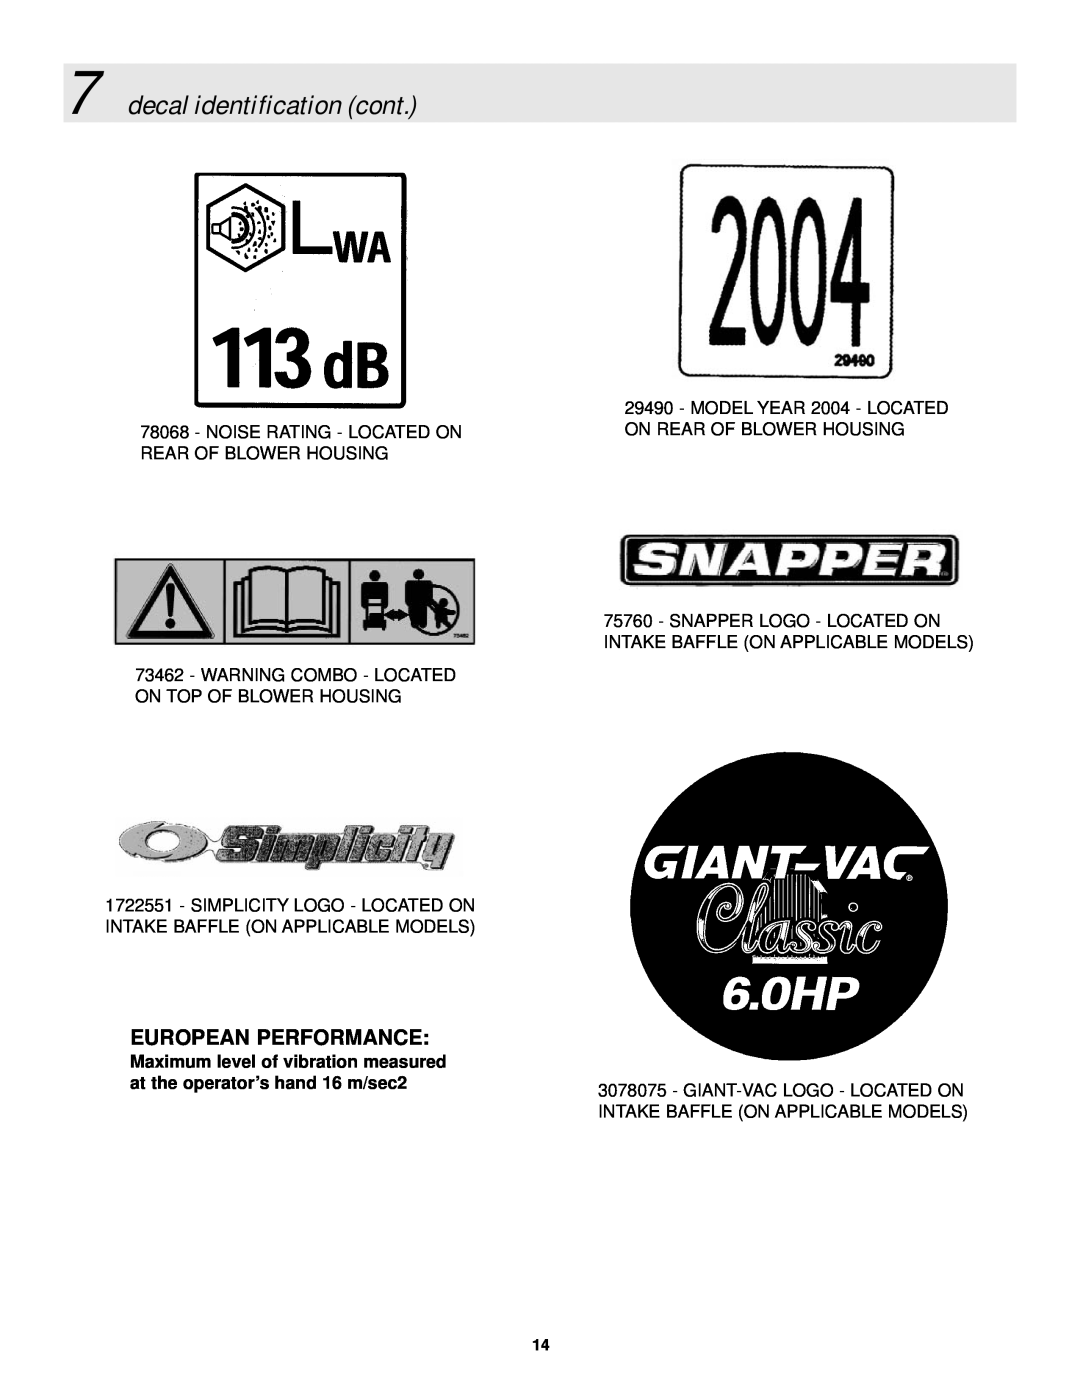 Snapper ELBC6151BV manual decal identification cont, European Performance 